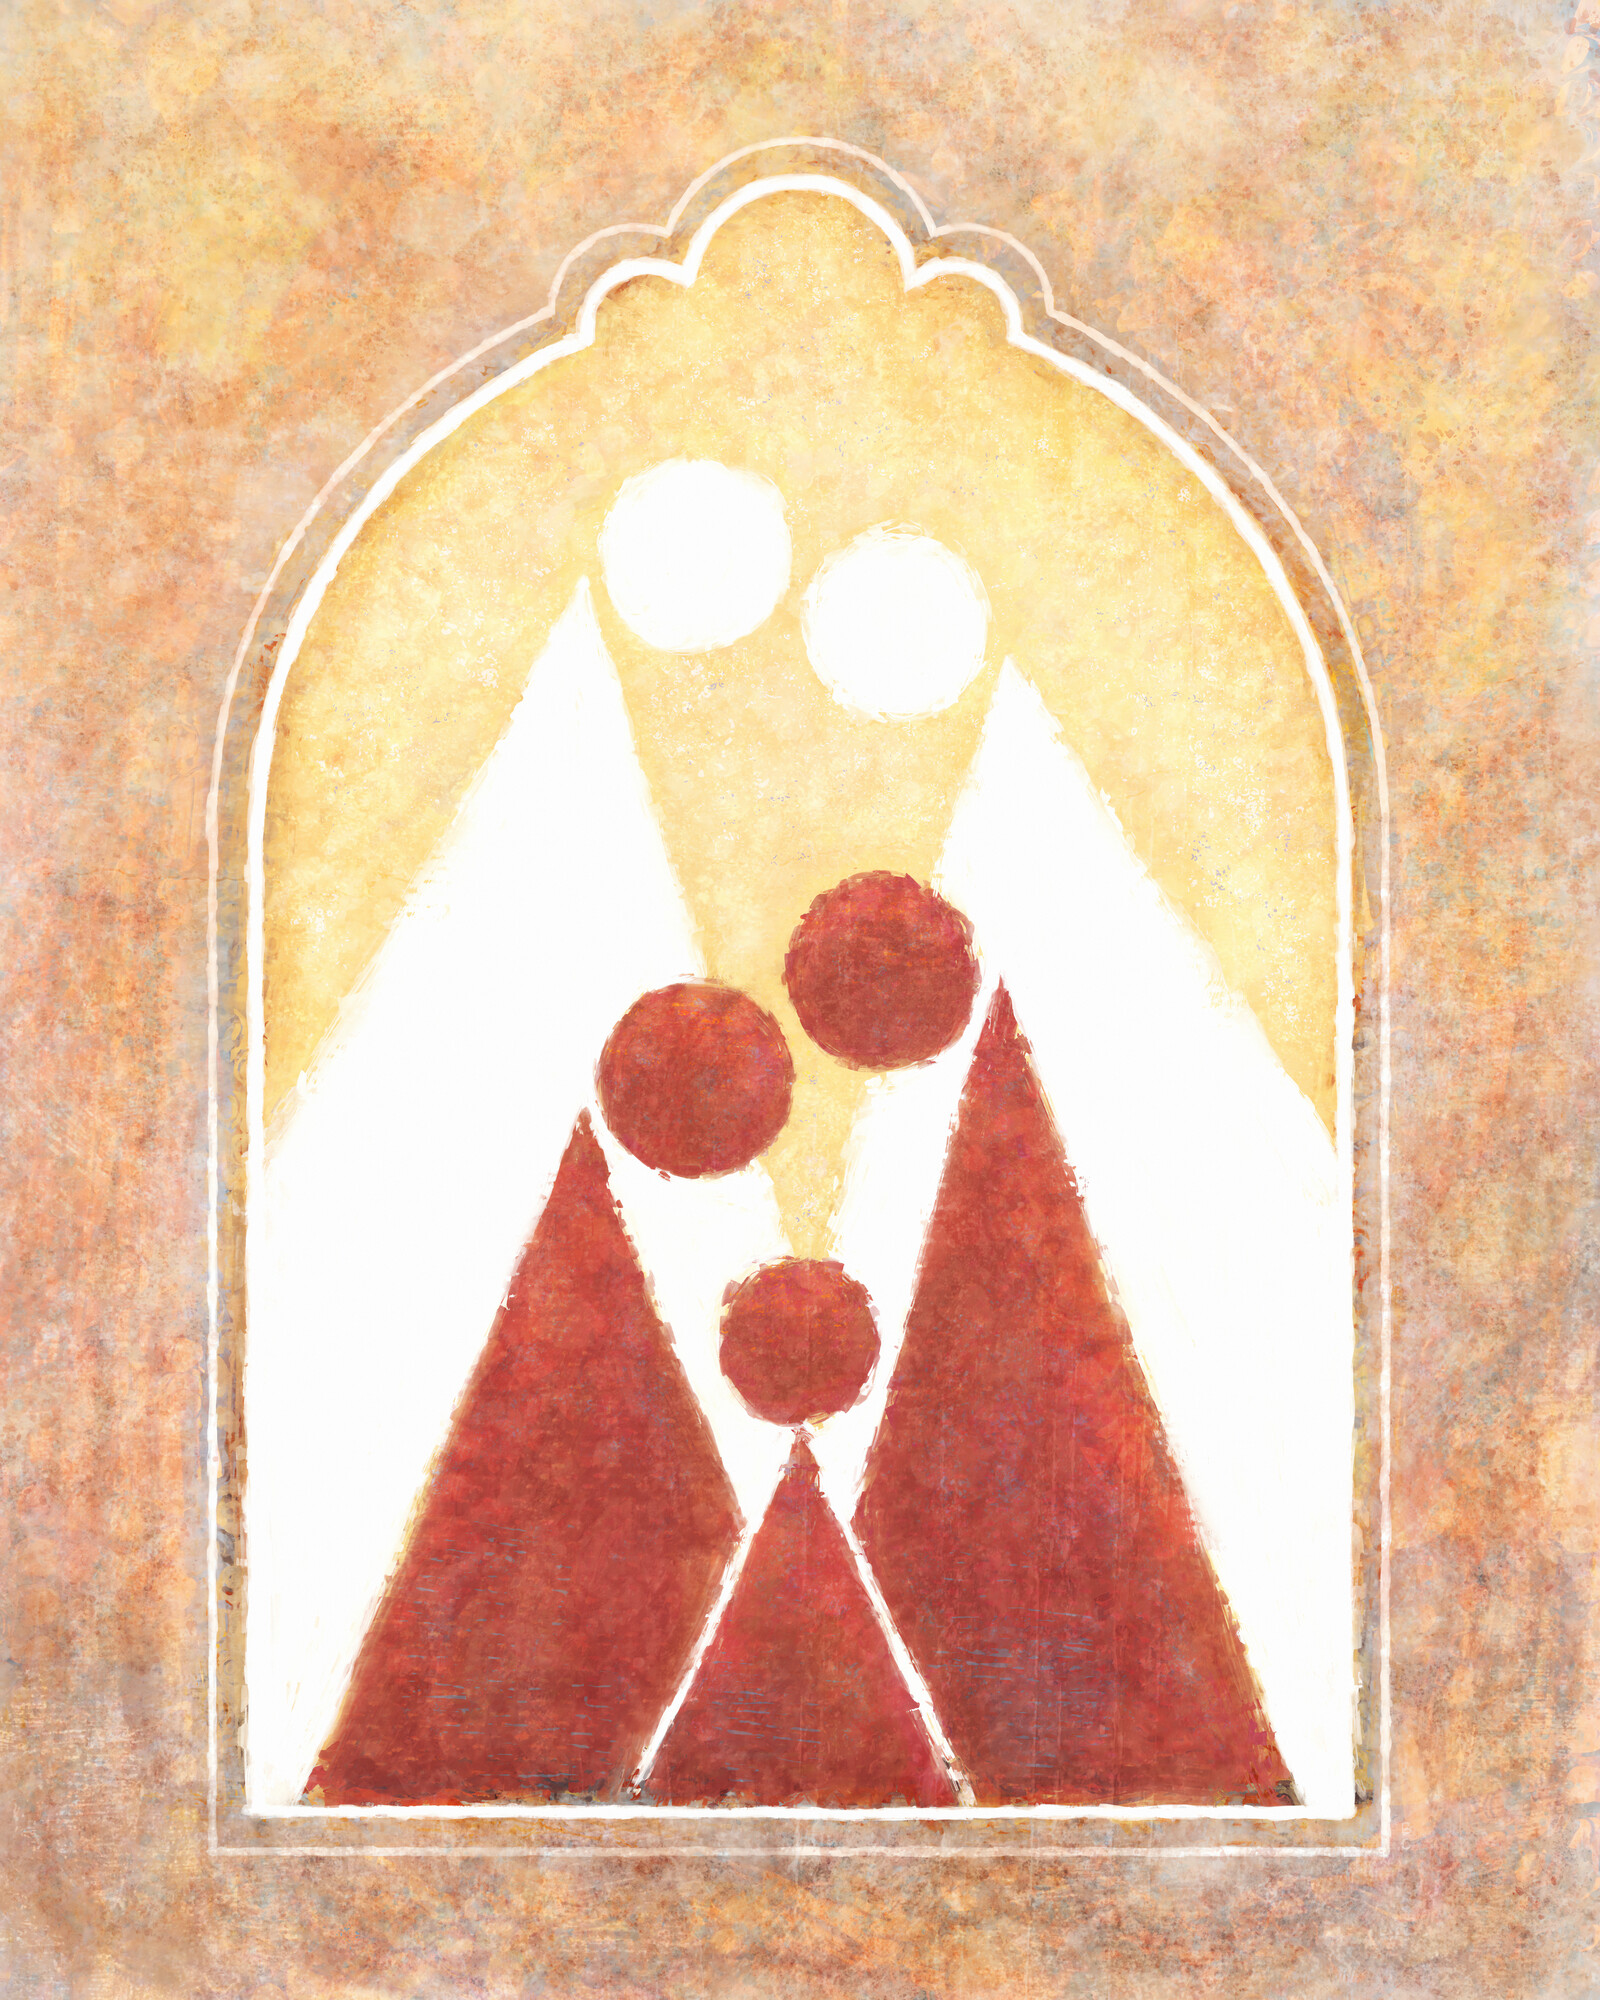 Red circle and triangle in the figure of a child, with two larger red circle and triangle figures standing behind it, with two even larger white circle and triangle figures standing behind them.